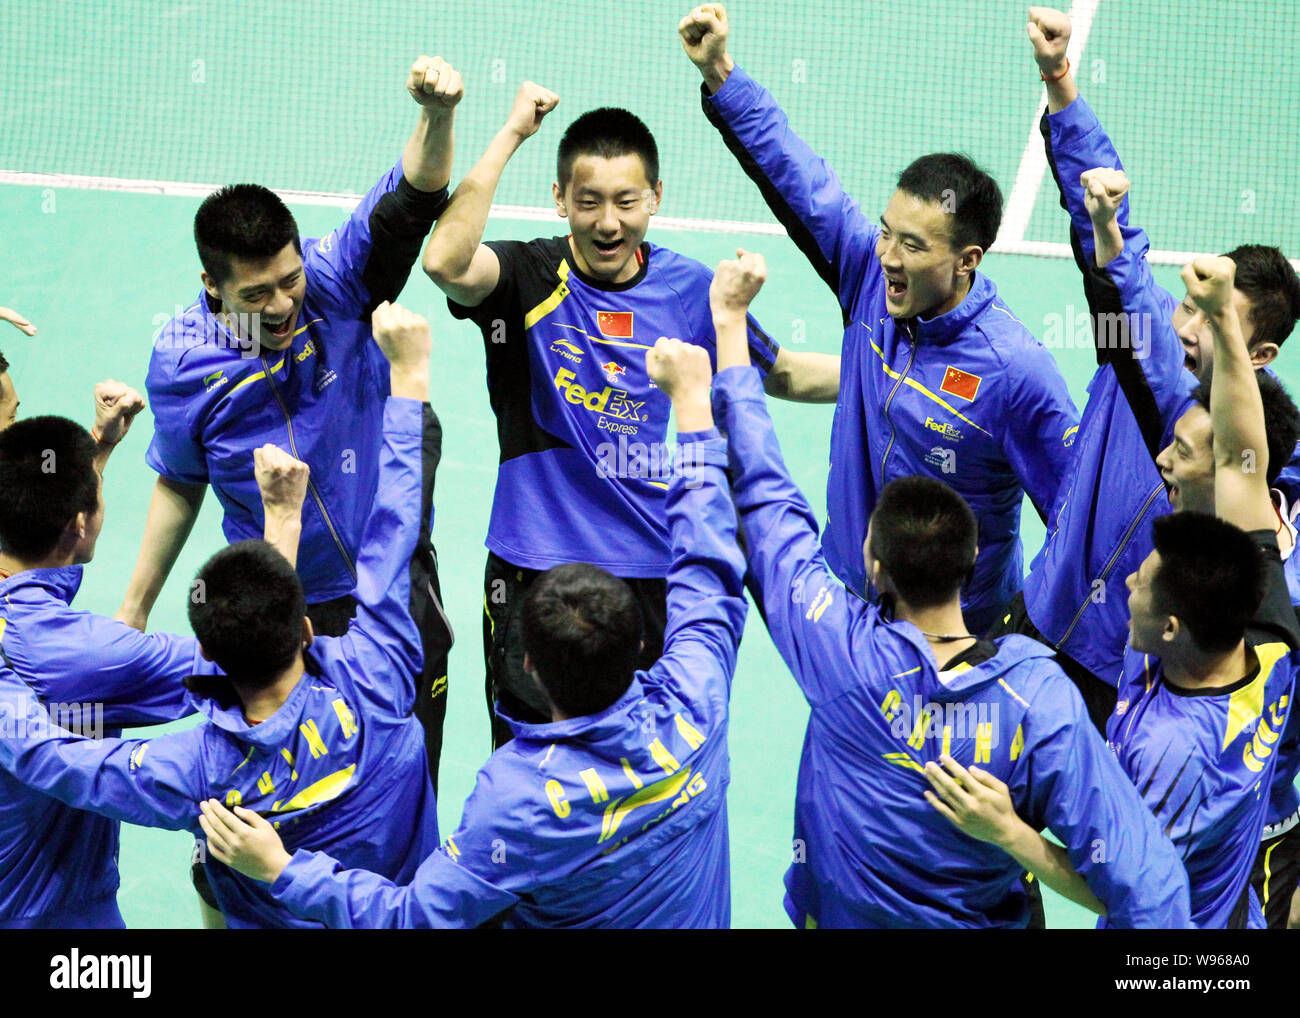 Chinese badminton players celebrate after defeating their English rivals in their Group A match during the Thomas Cup world badminton team championshi Stock Photo